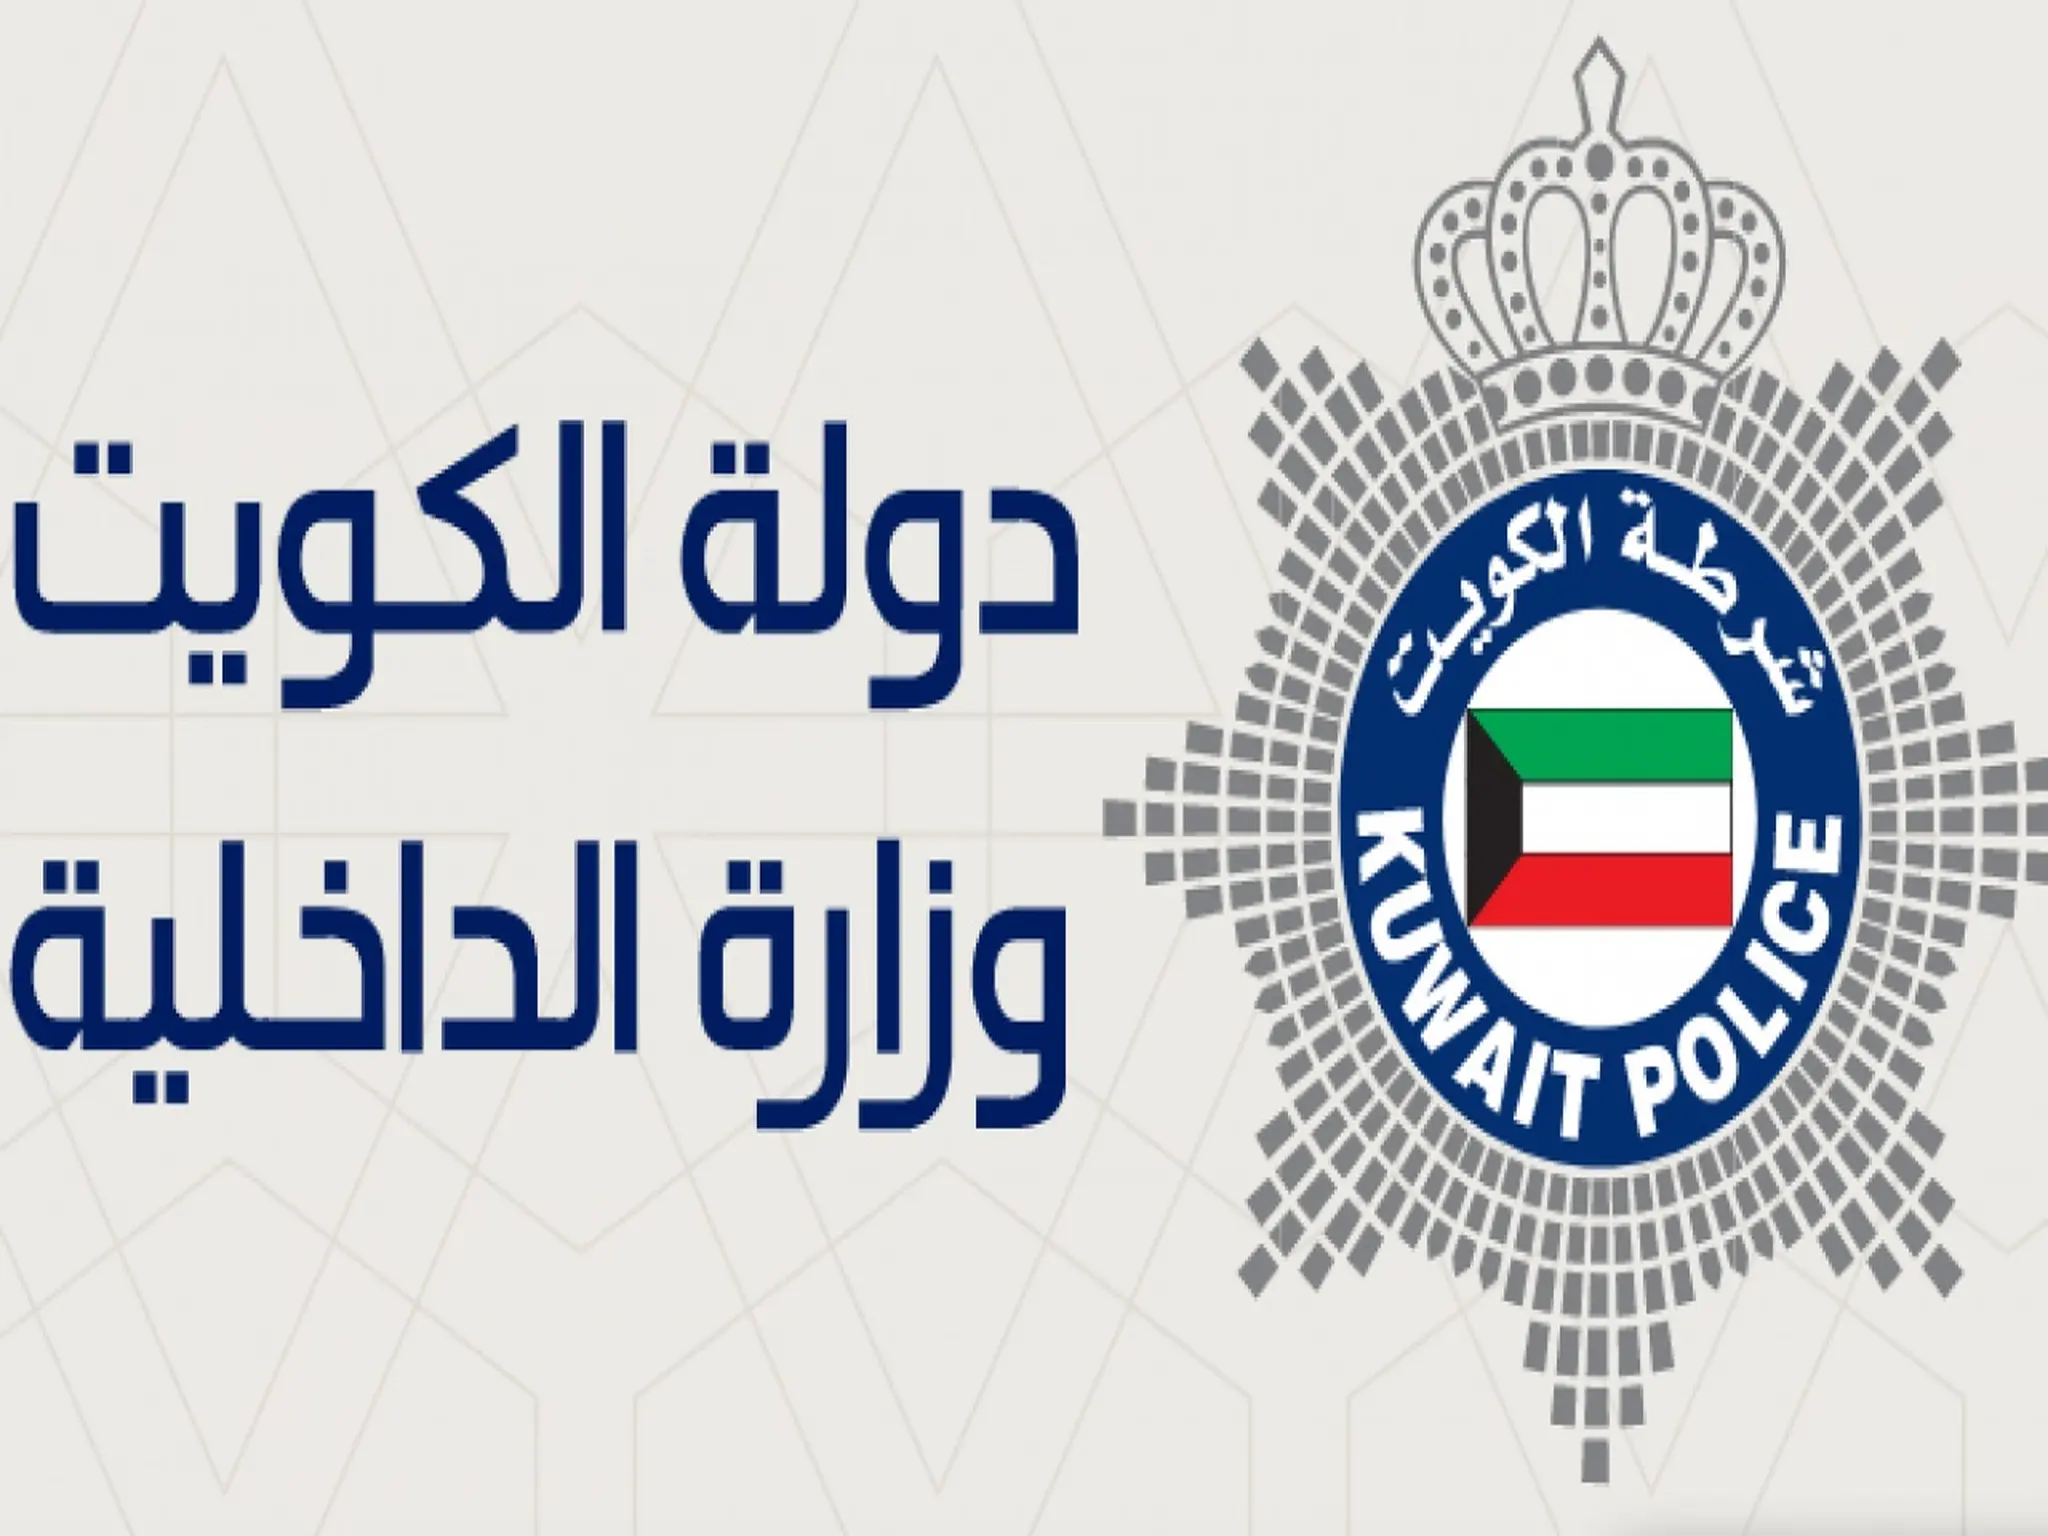 The Kuwaiti Ministry of Interior receives visit requests for specific countries